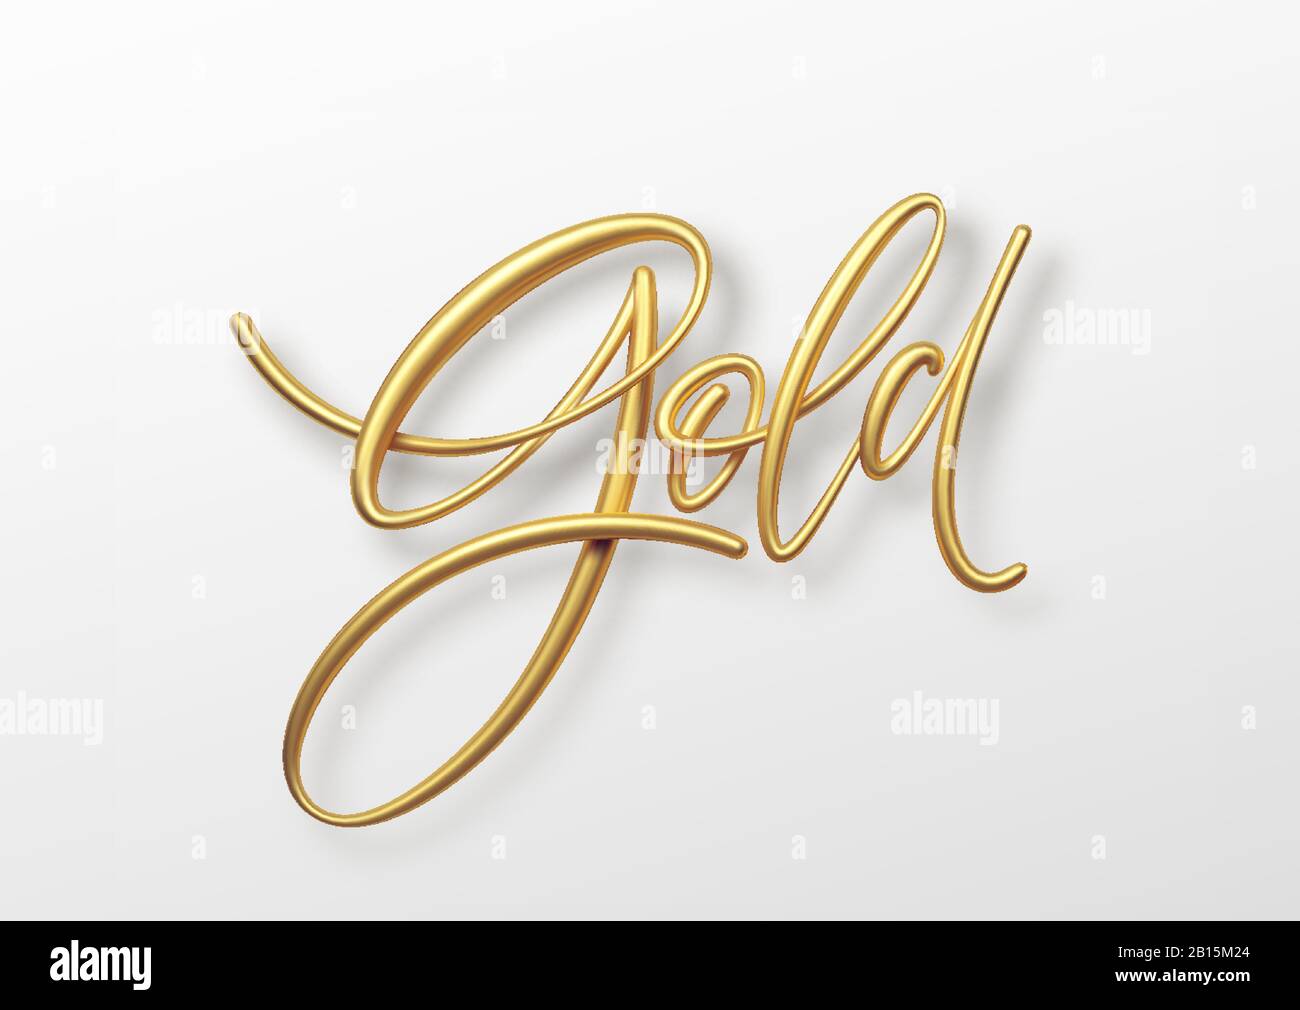 Word Gold 3d calligraphic lettering realistic illustration isolated on white background. Vector illustration Stock Vector